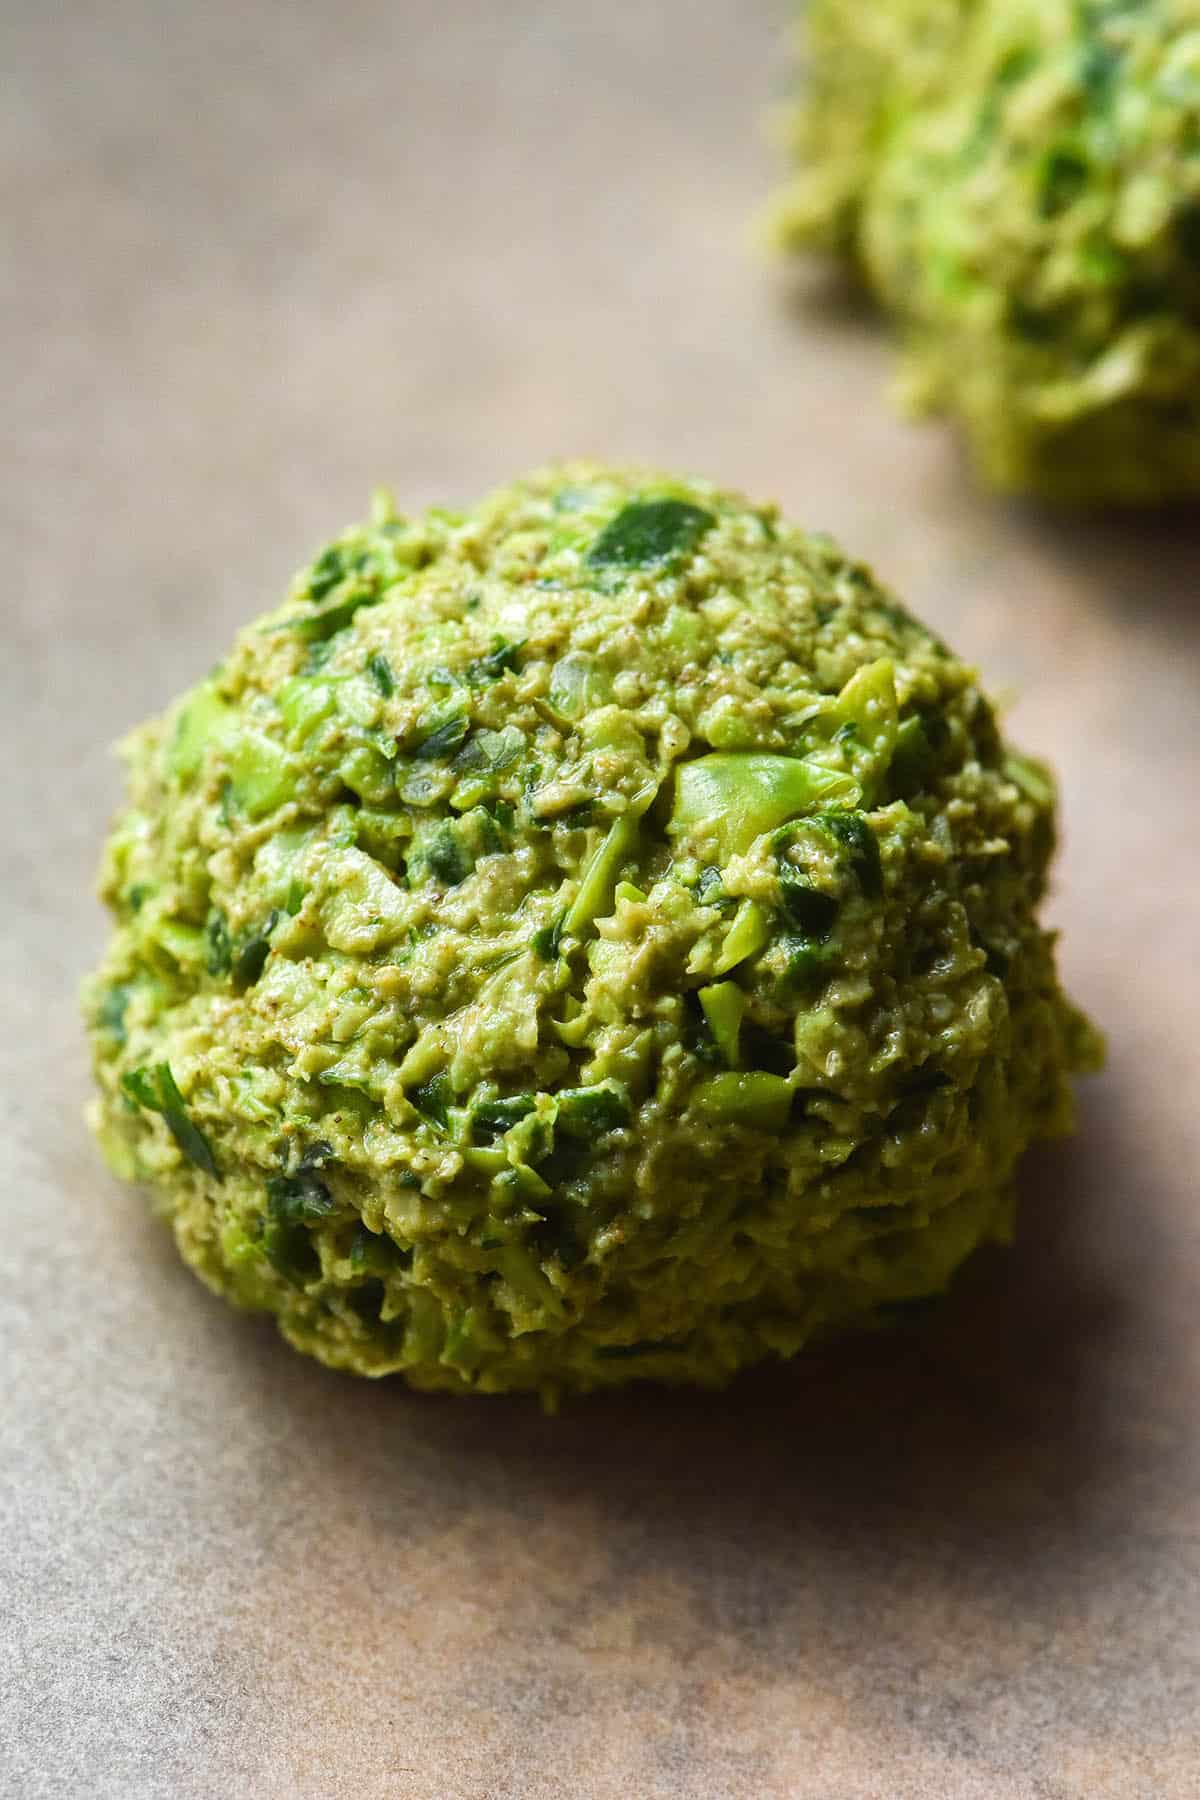 A macro image of a bright green uncooked falafel